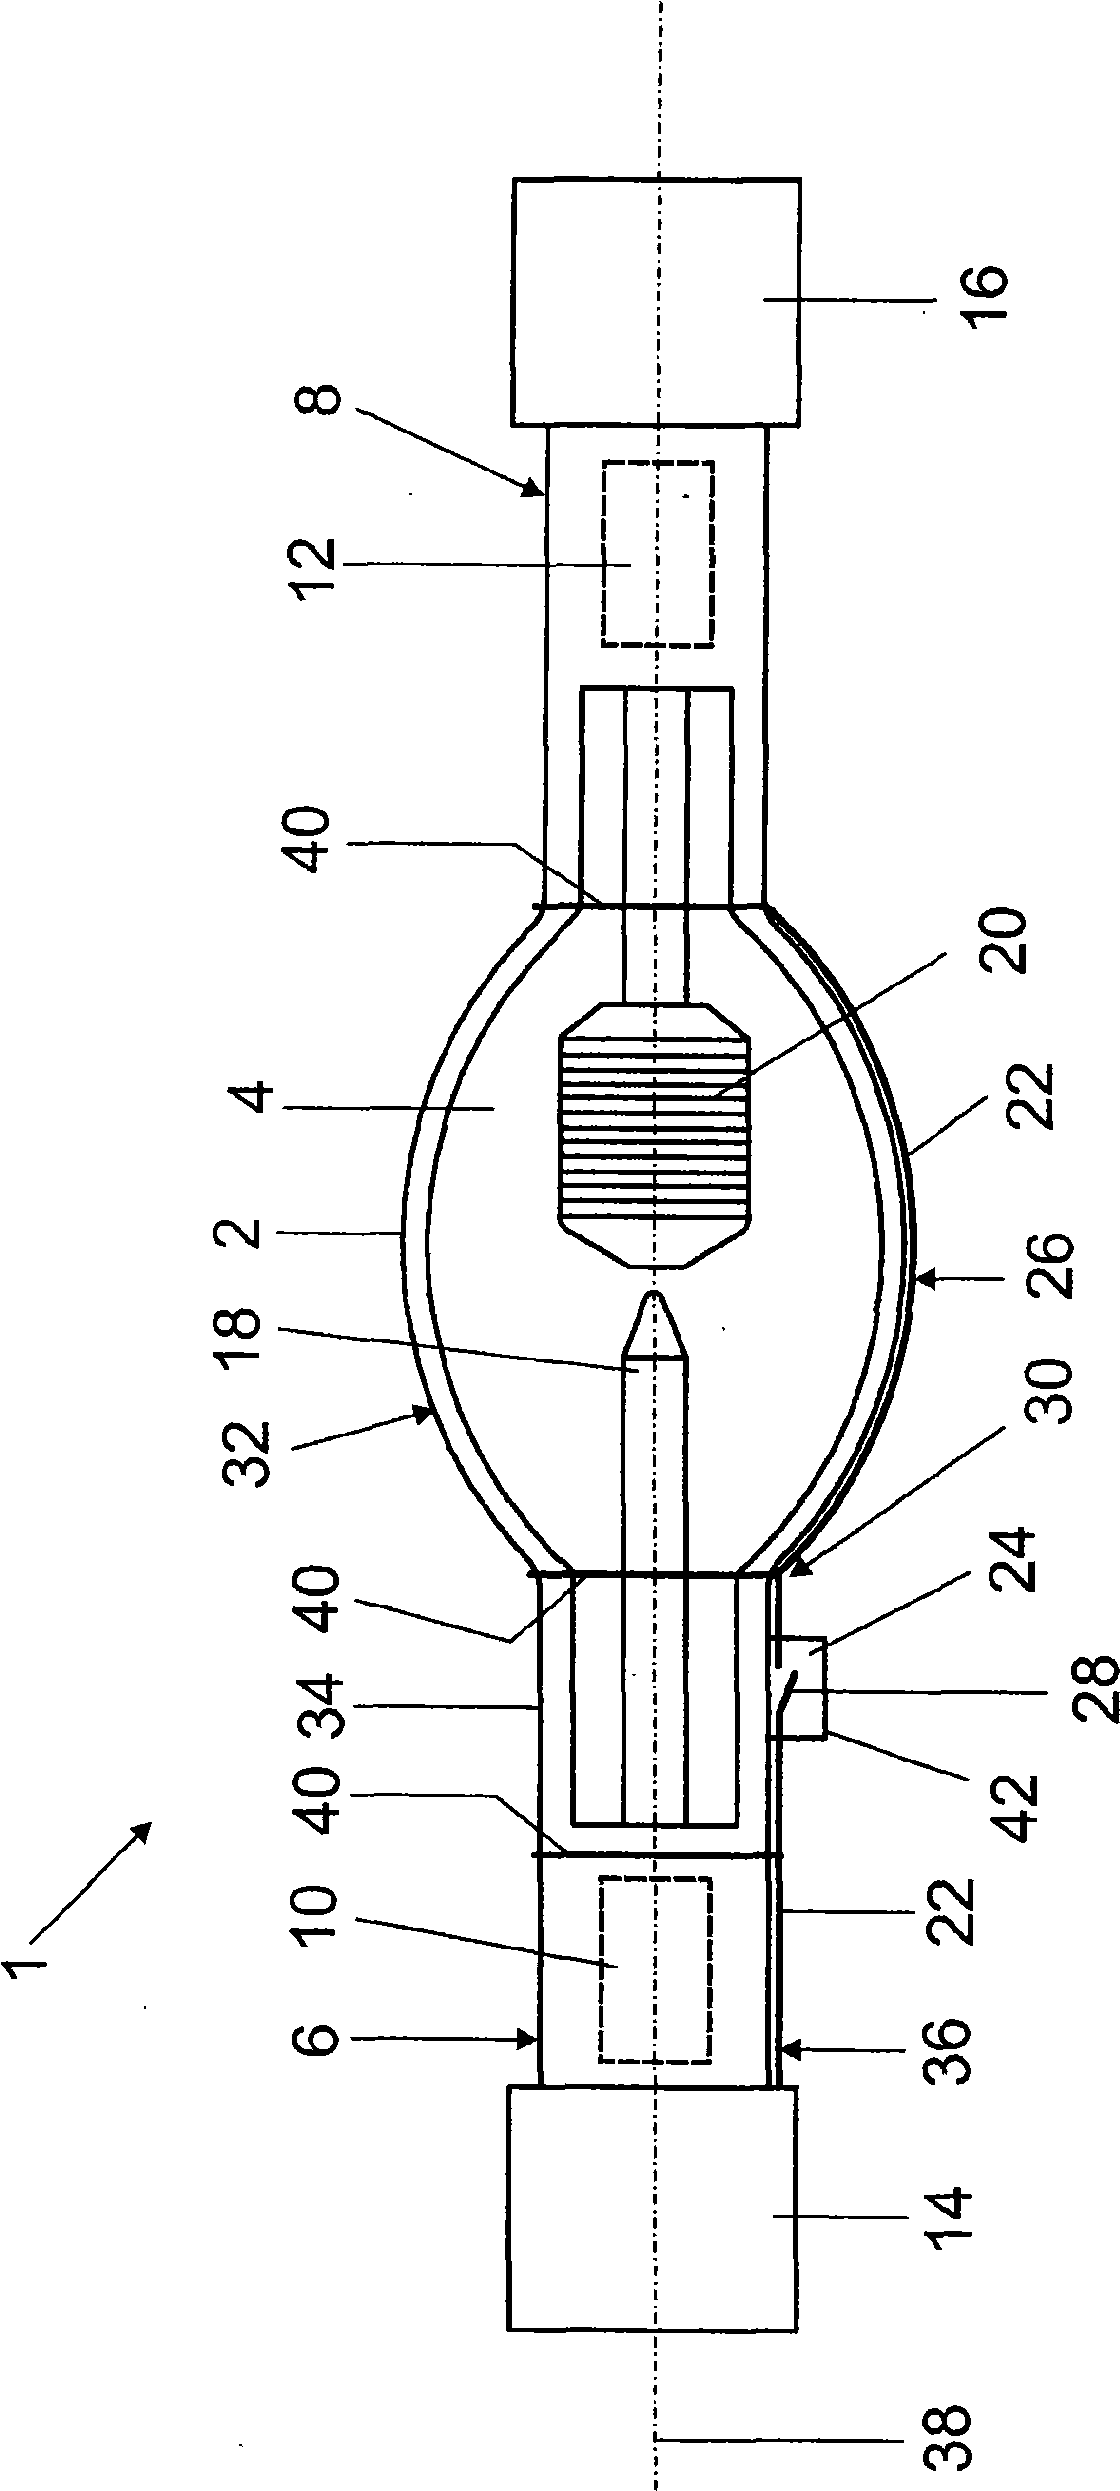 Discharge lamp with an auxiliary ignition element